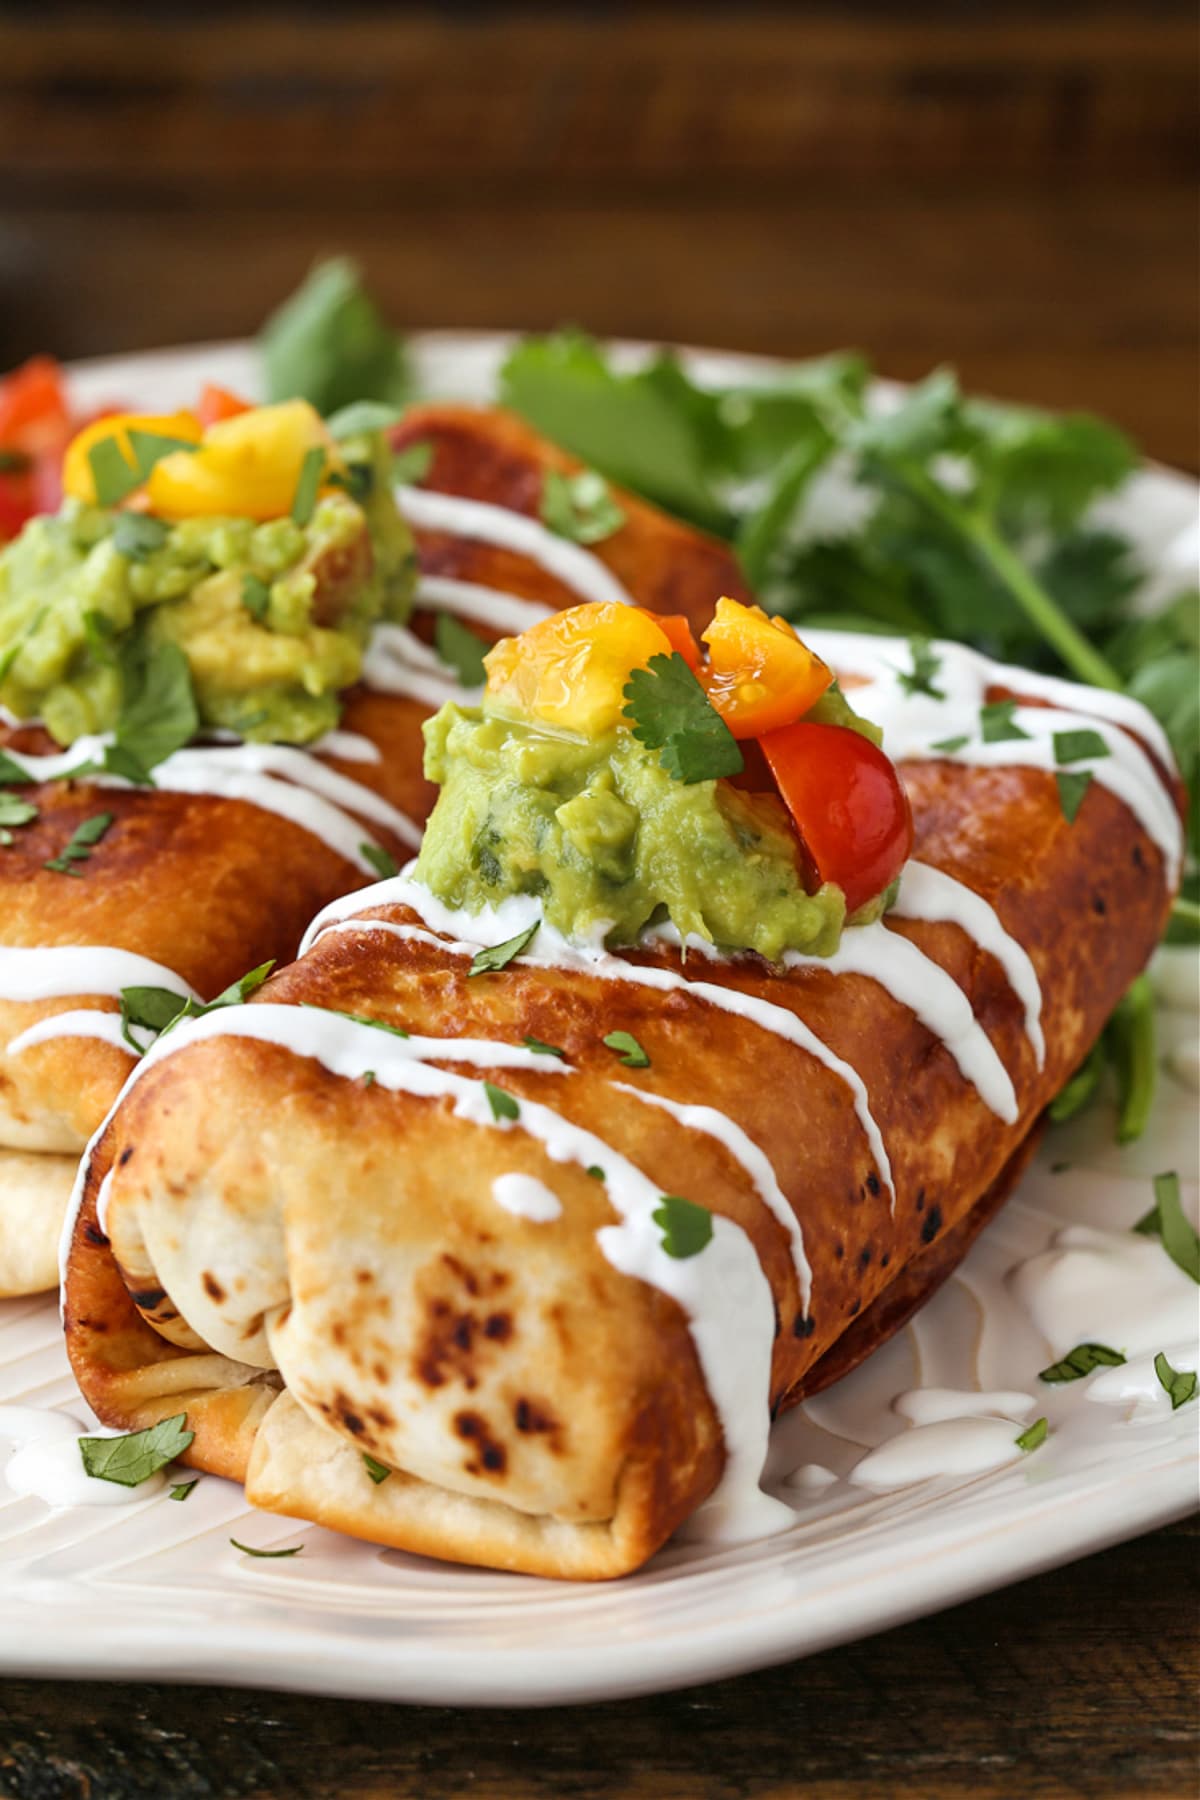 chicken chimichangas on a plate with toppings and sour cream drizzle